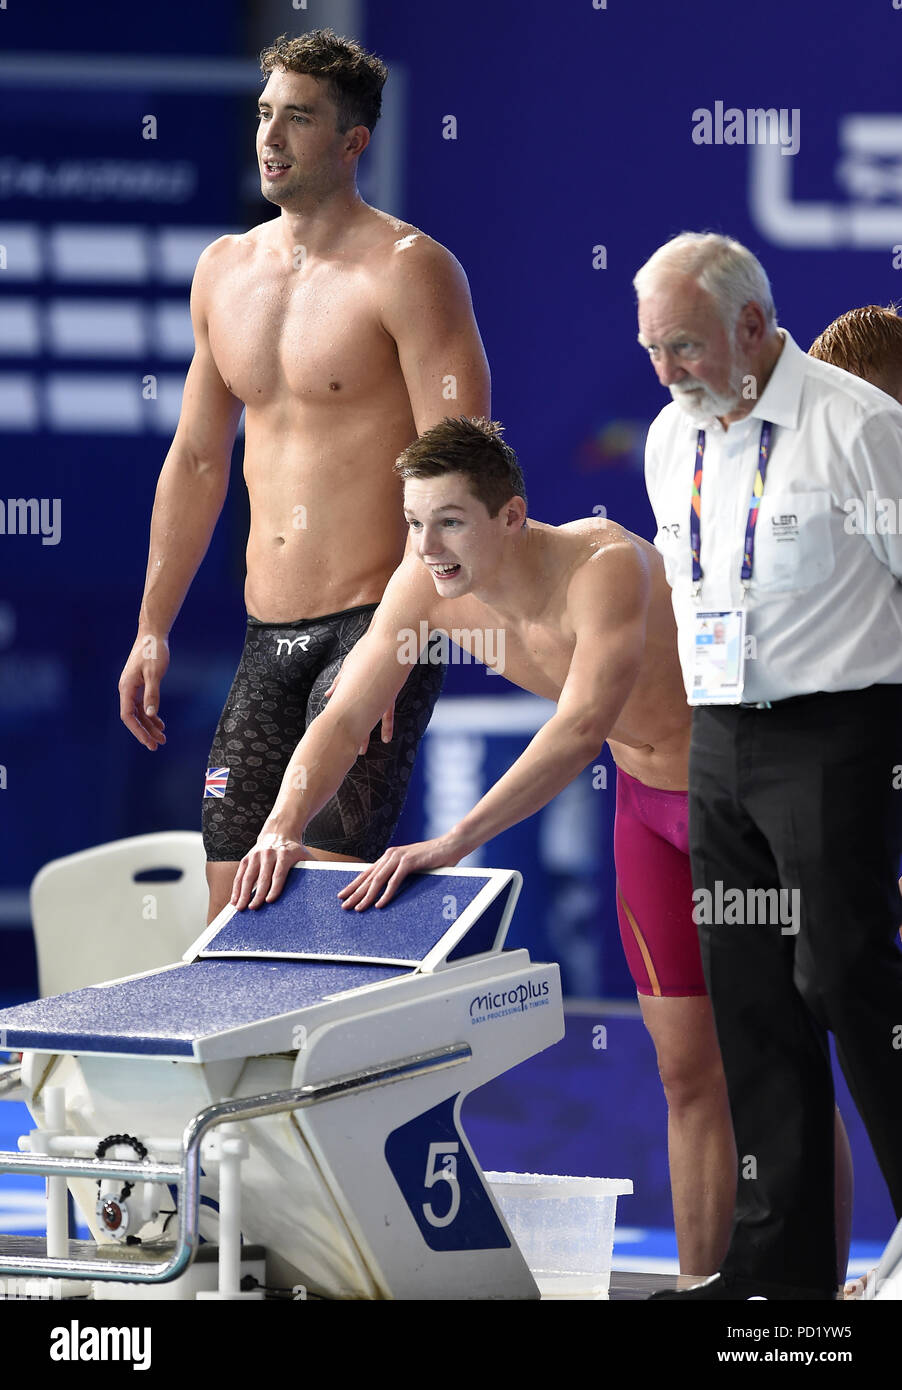 Great Britain S Calum Jarvis And Duncan Scott In The Men S 4 X 200m Freestyle Relay Final During Day Four Of The 2018 European Championships At The Tollcross International Swimming Centre Glasgow Stock